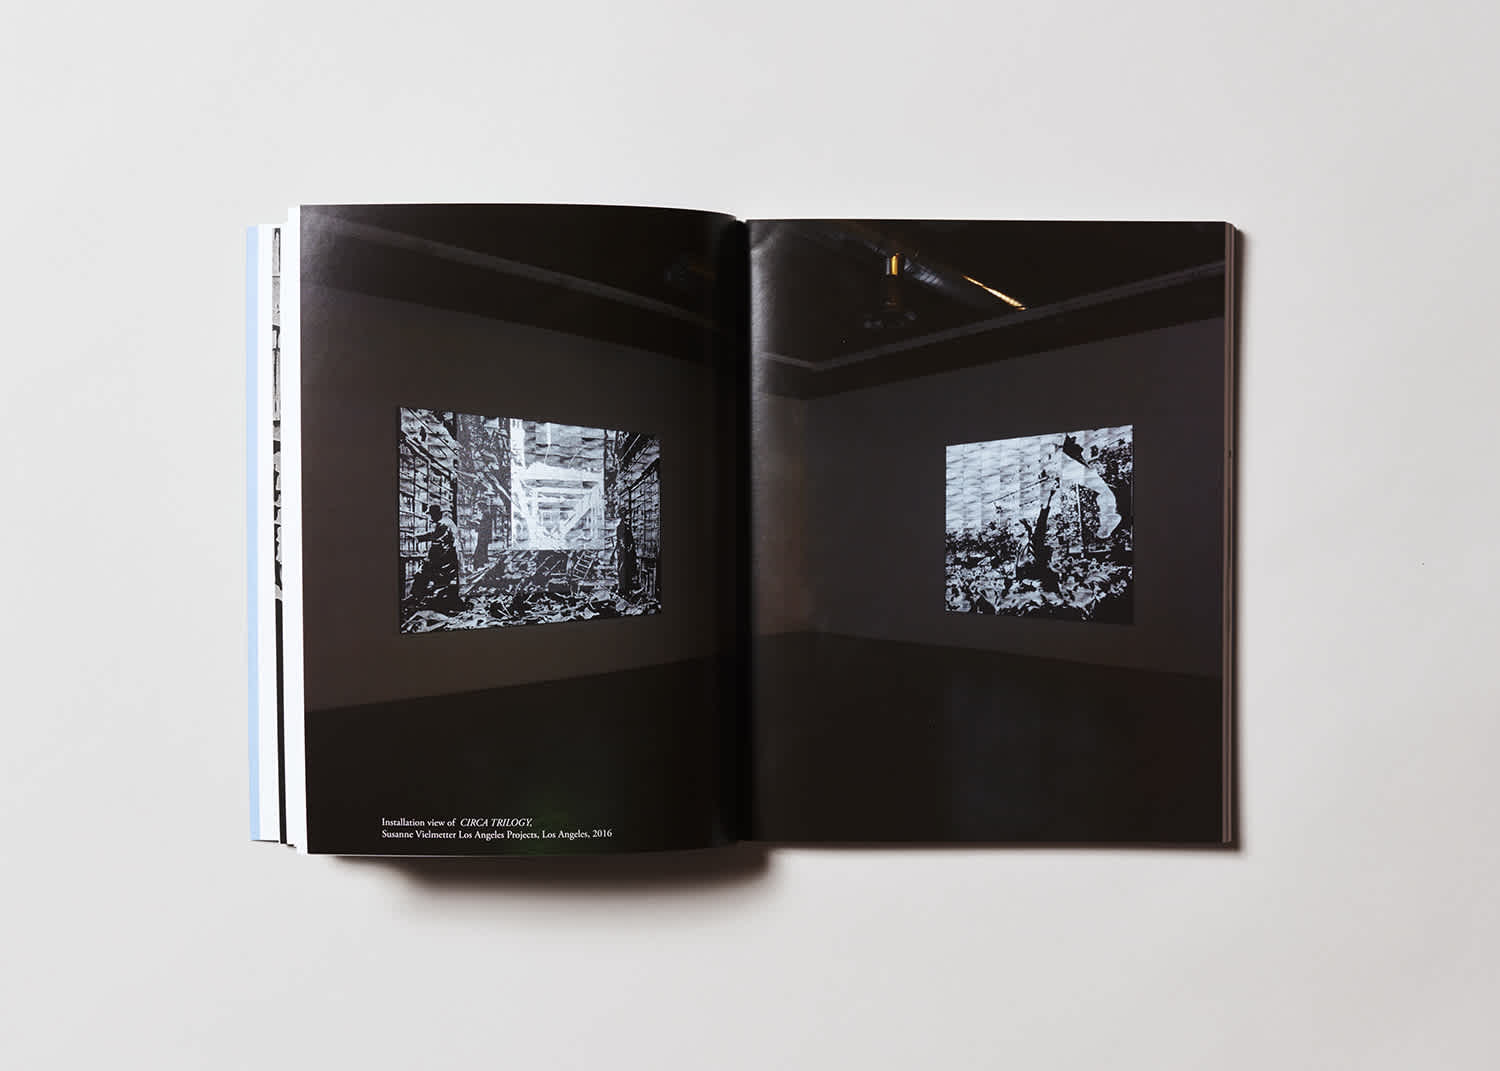 Centerfold of a book that features an installation shot with two projected films on the walls.